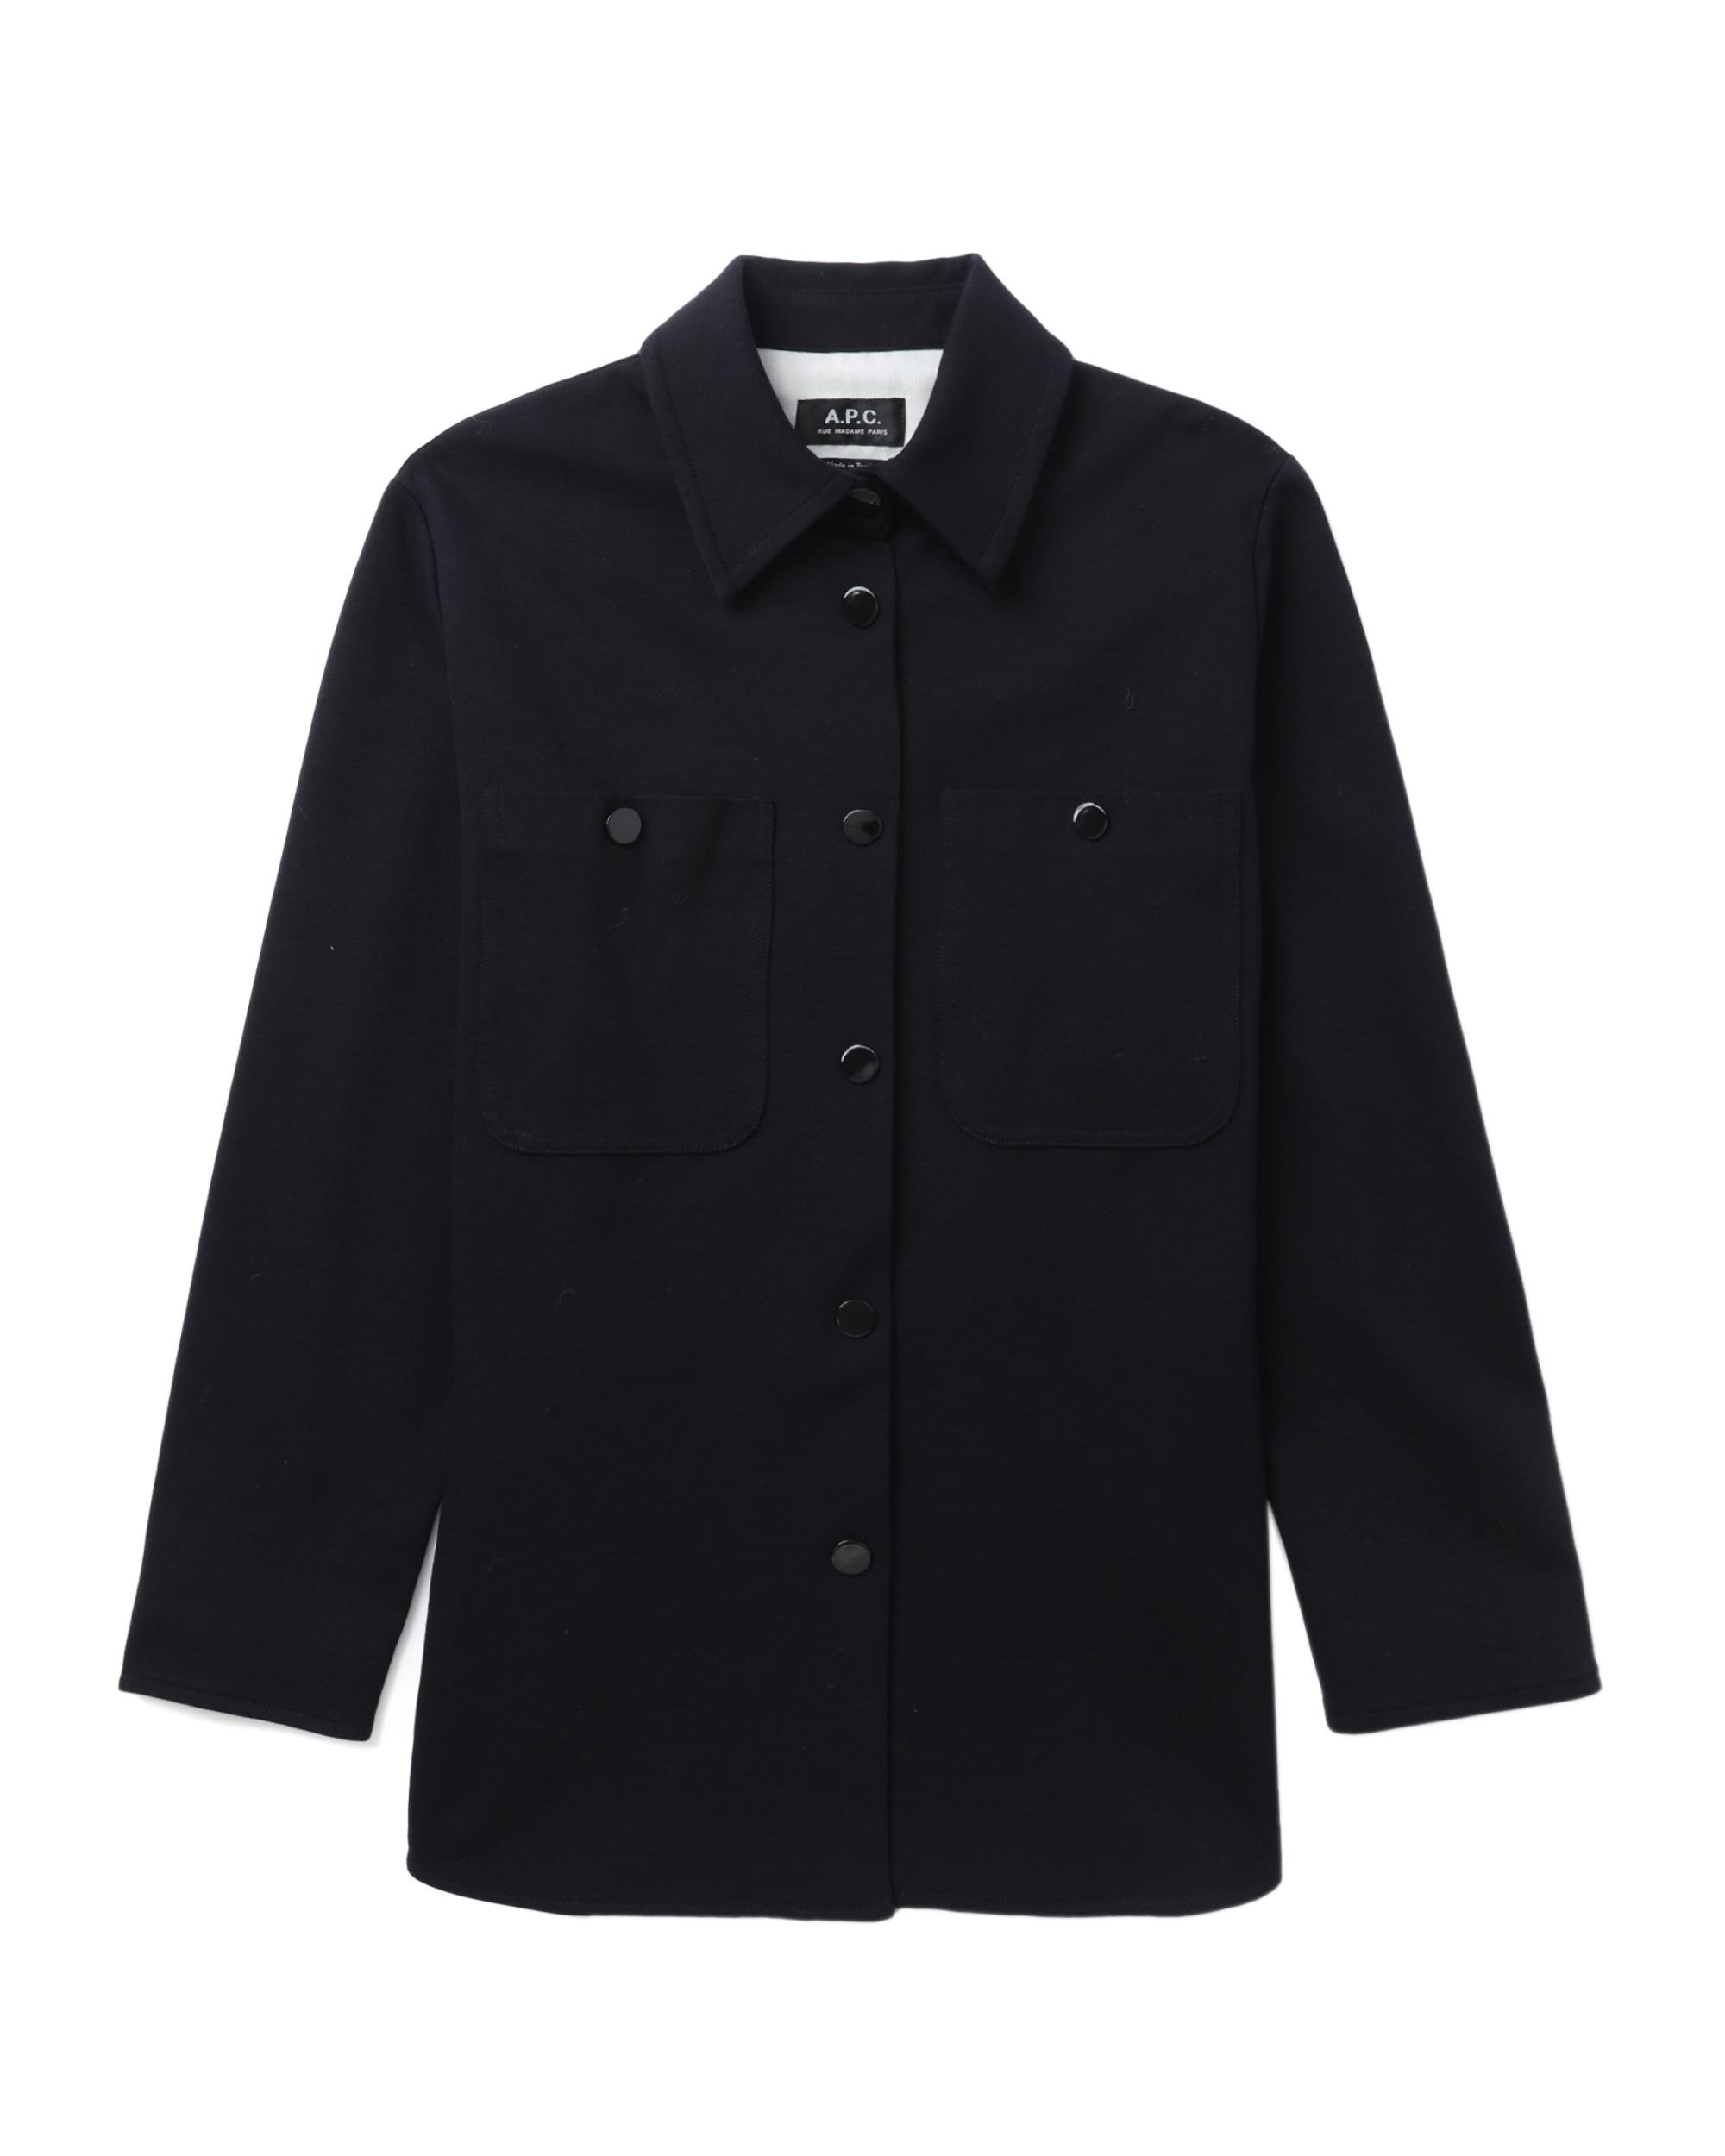 Tania overshirt by A.P.C.